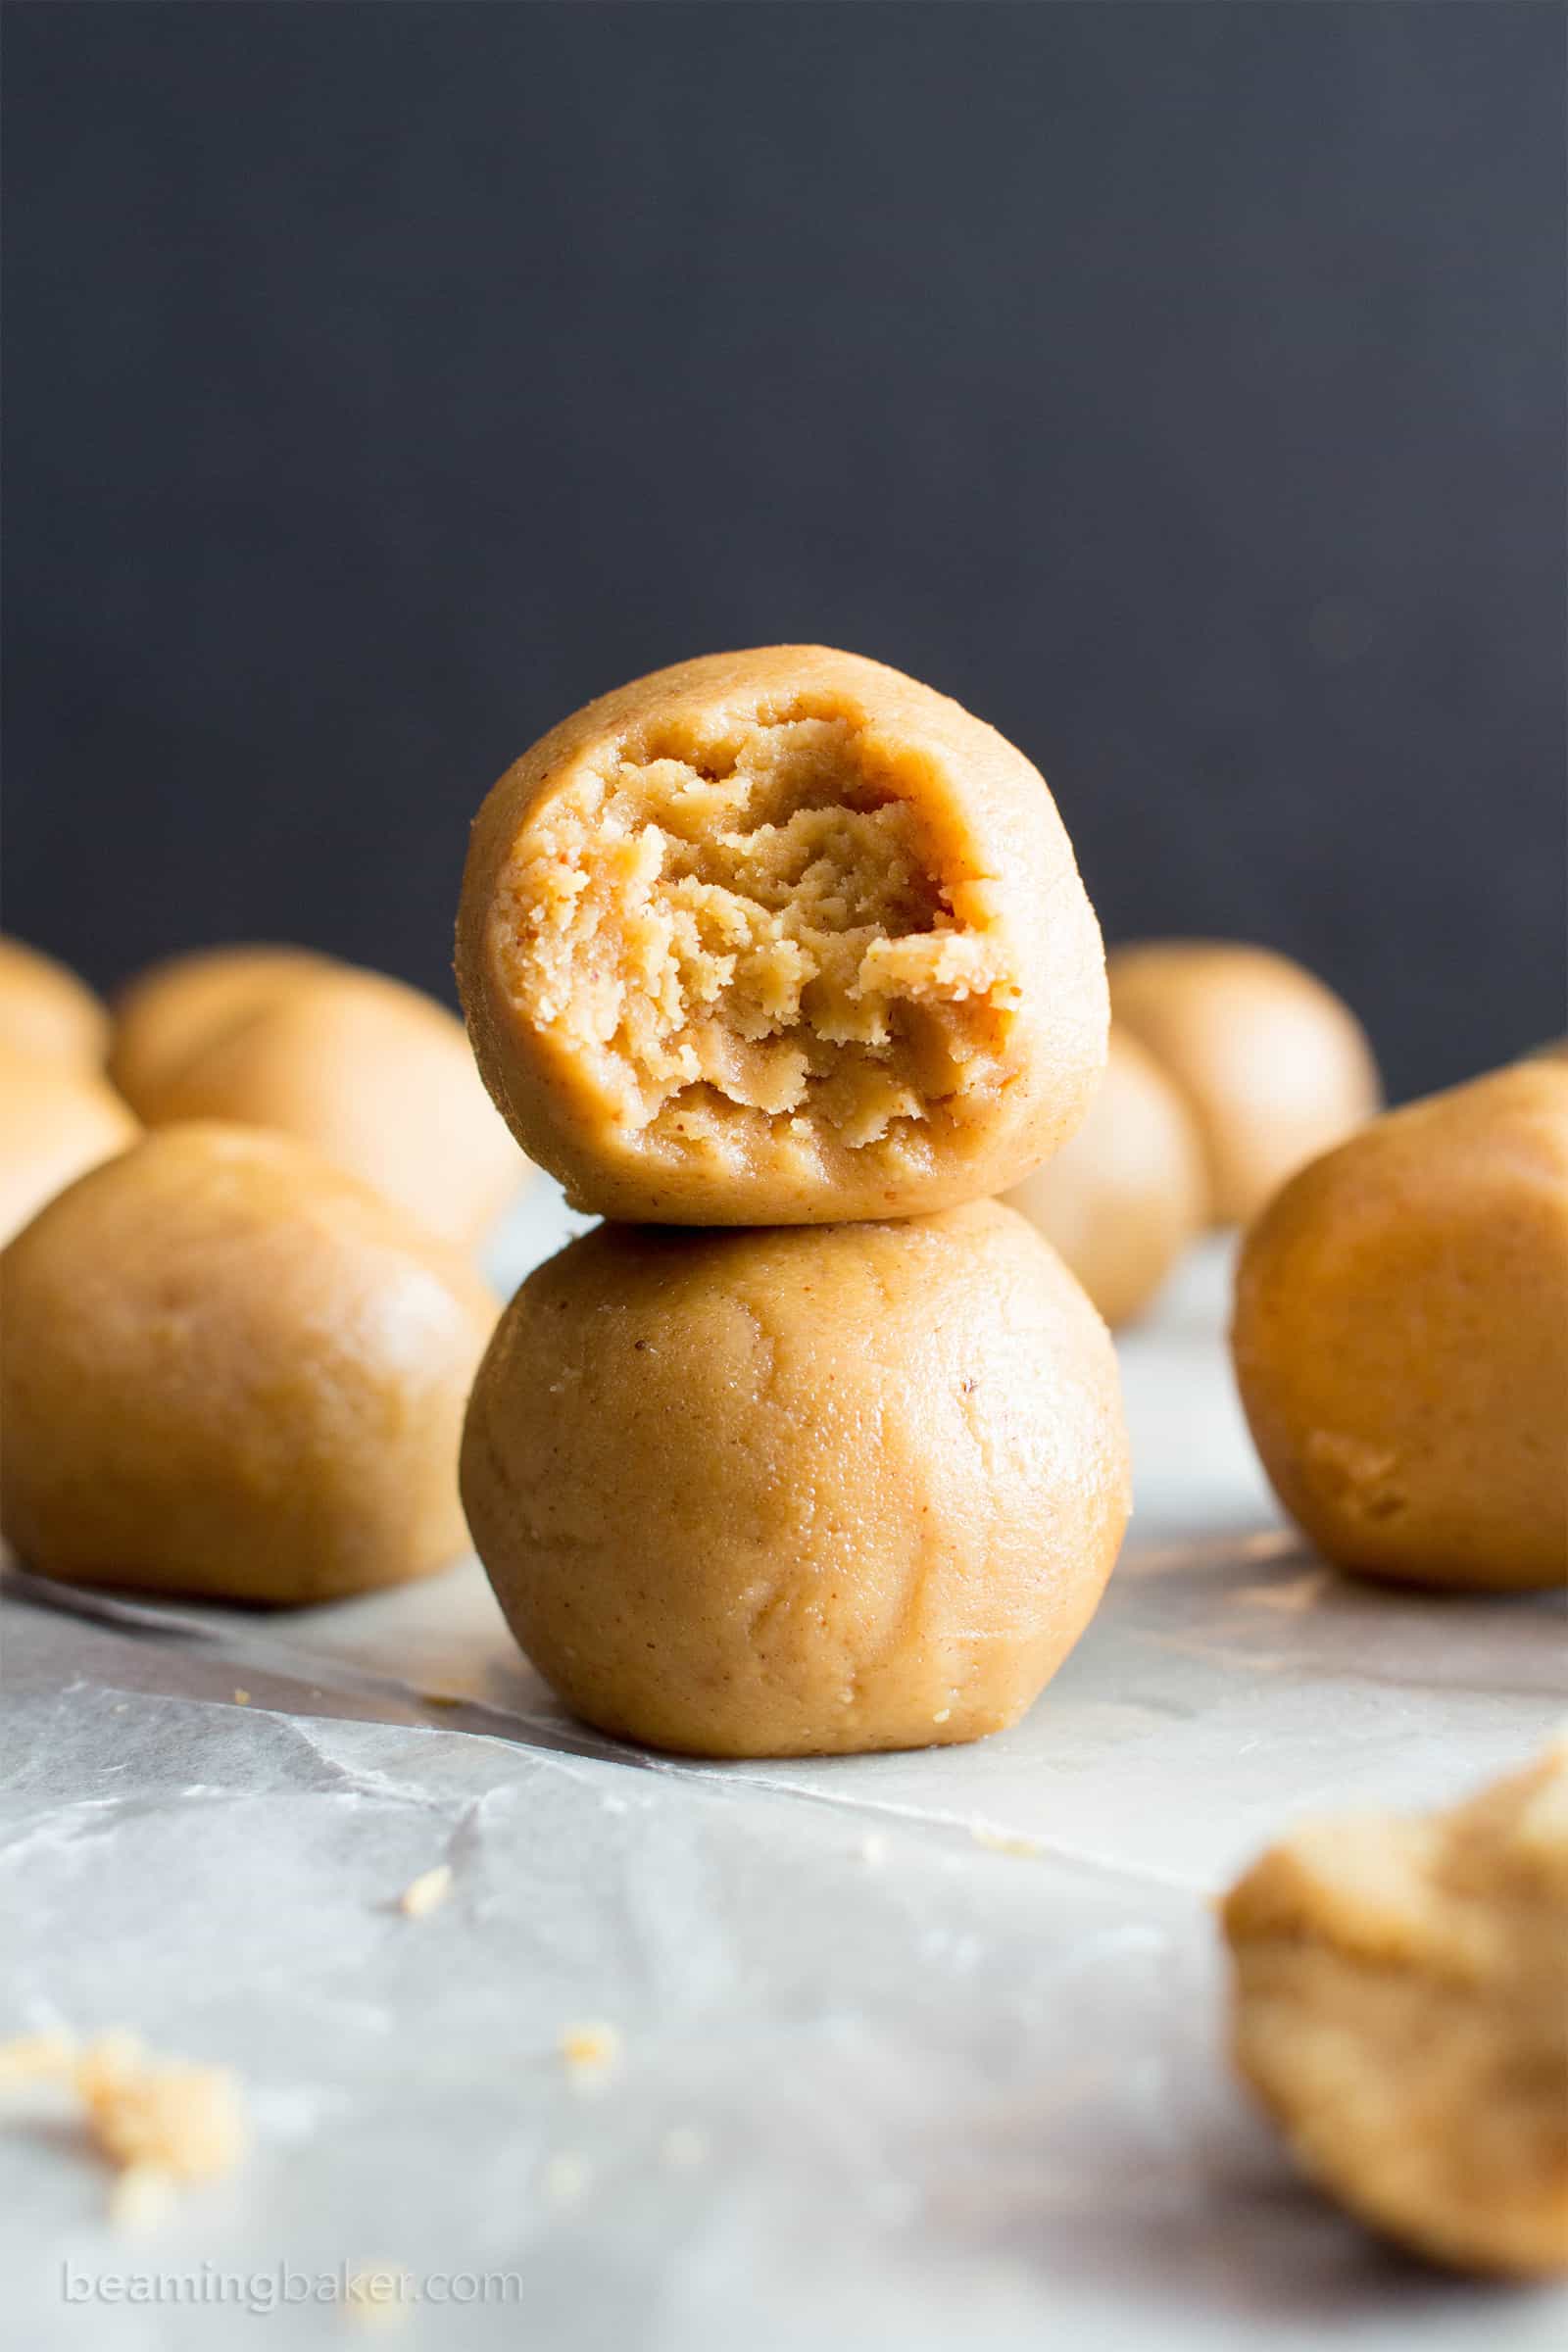 No Bake Peanut Butter Balls: just 3 ingredients for the best peanut butter bites—no bake, easy to make, simple & healthy ingredients. Soft and delicious no bake peanut butter balls. Vegan. #NoBake #PeanutButter #NoBakeBalls #NoBakeBites #EnergyBites #EnergyBalls | Recipe at BeamingBaker.com